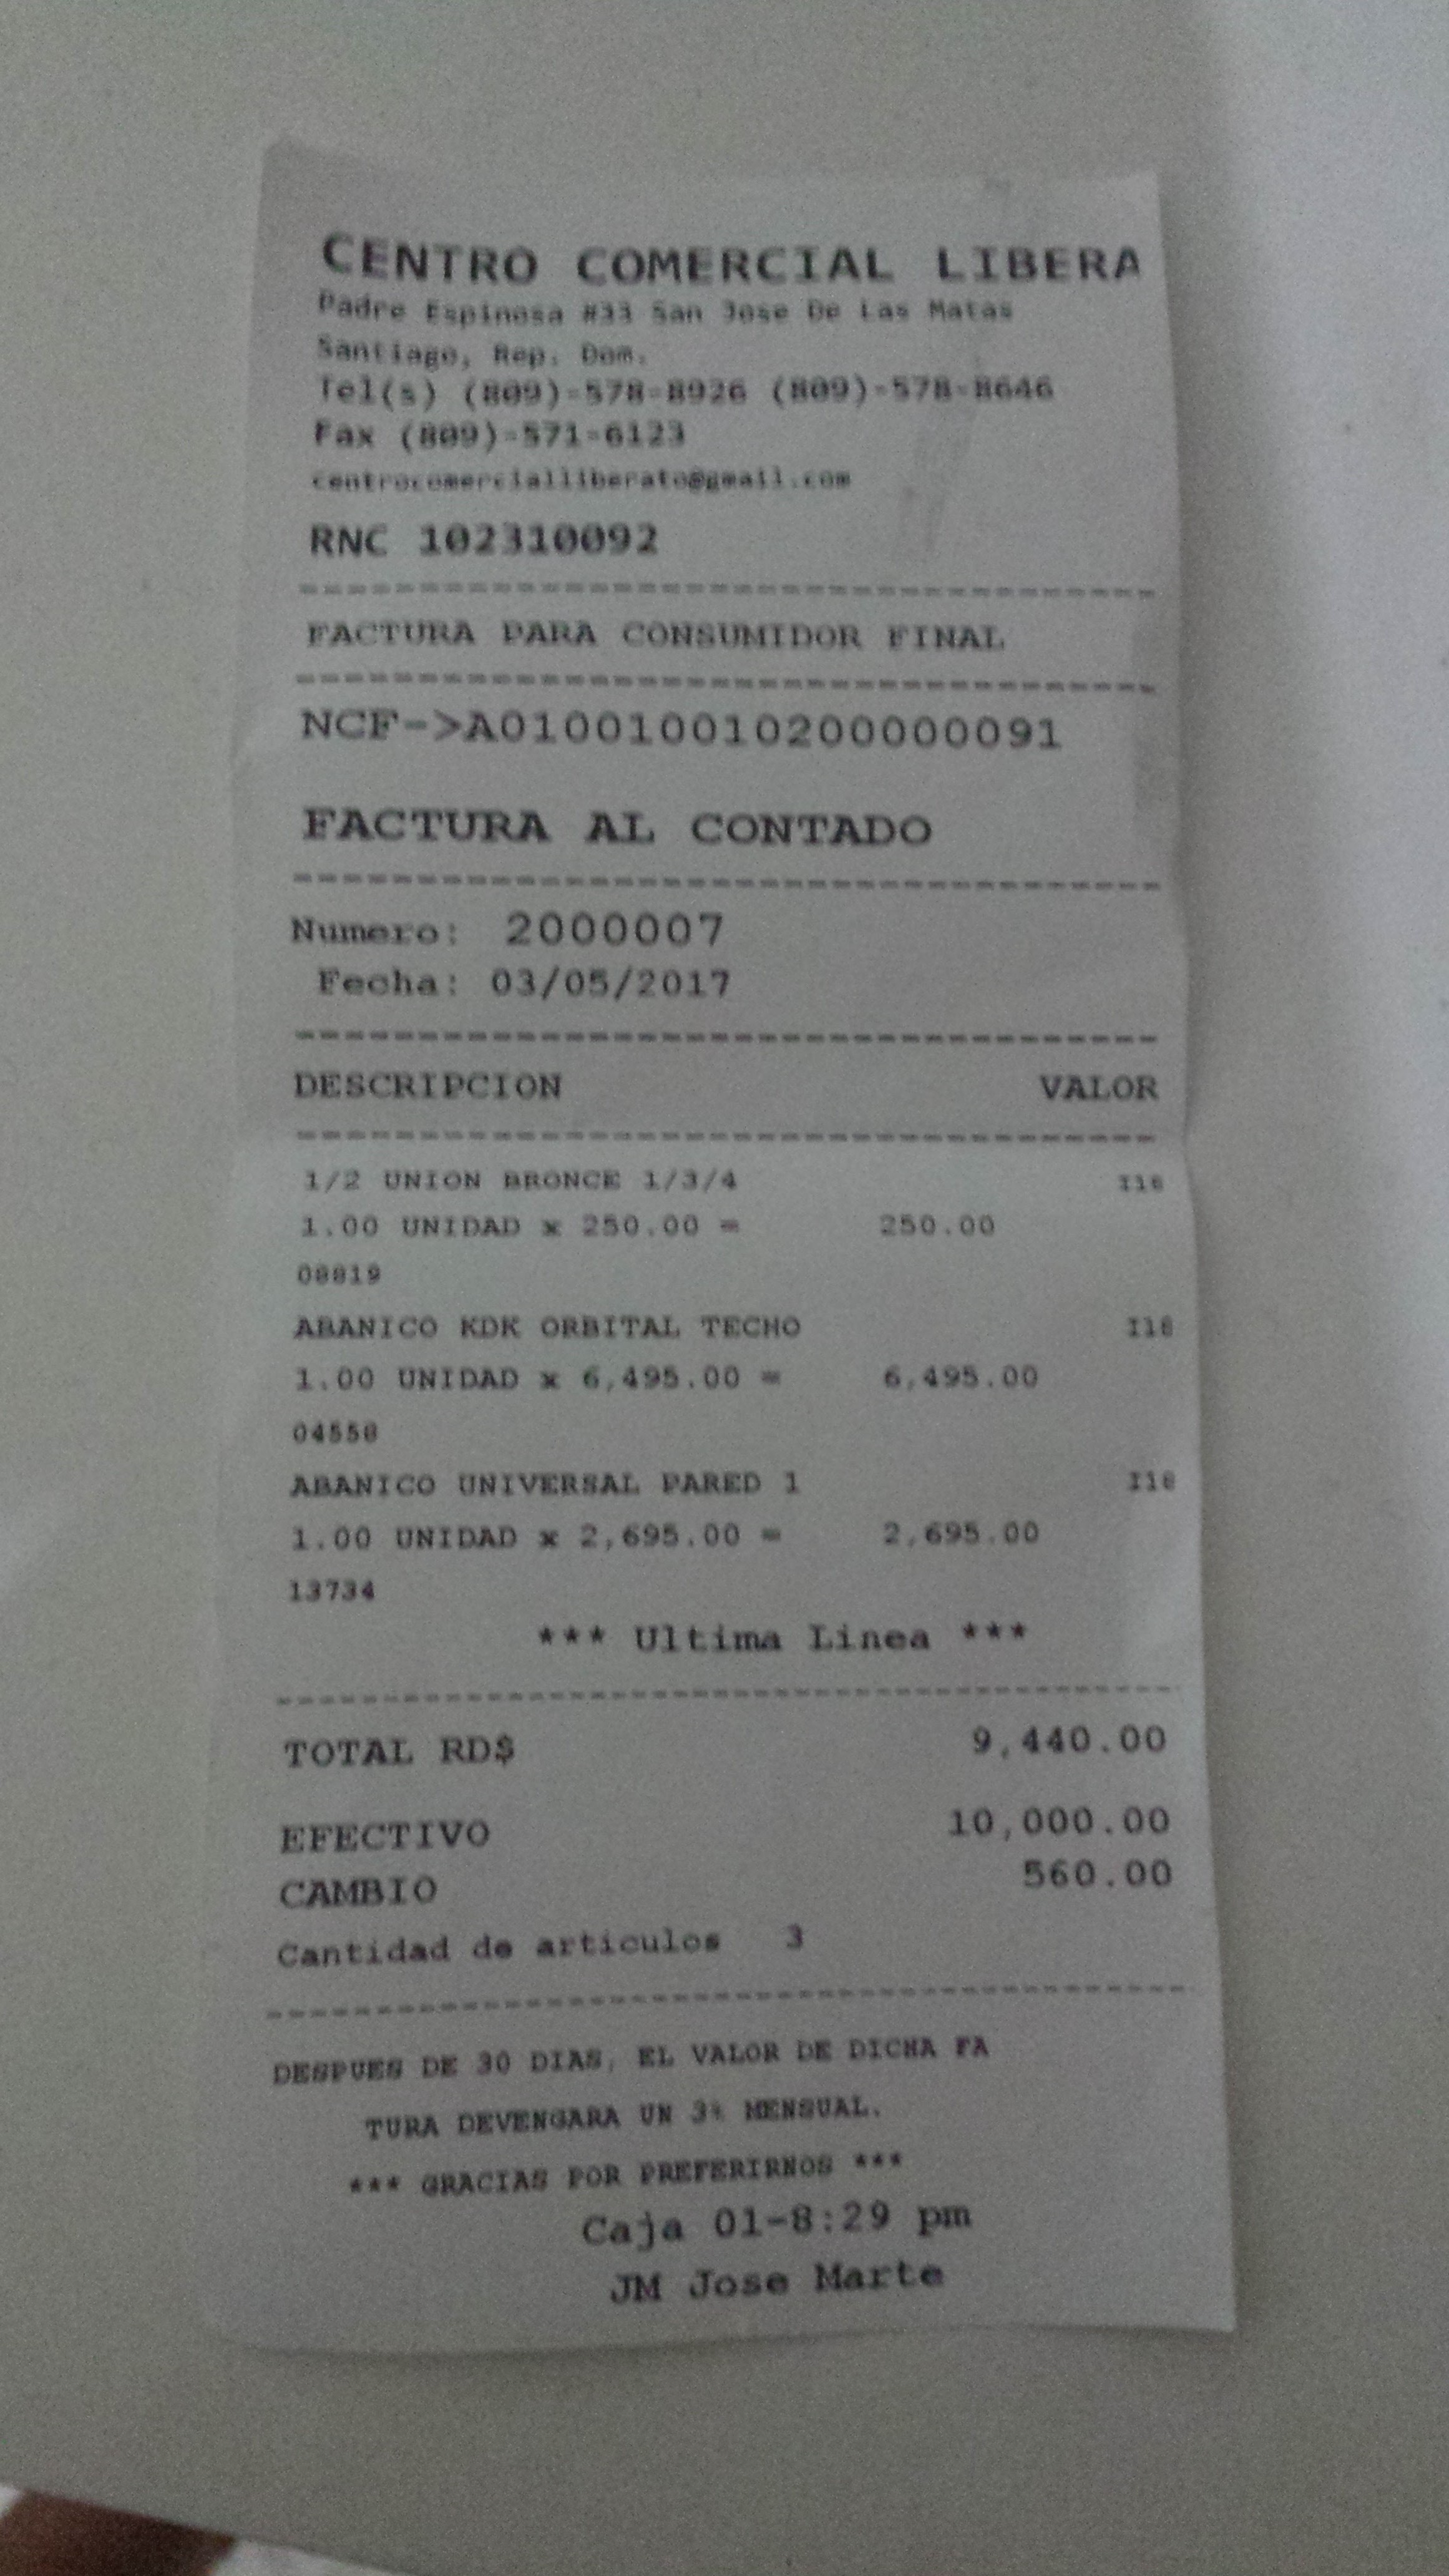 Example of an invoice or ticket as printed